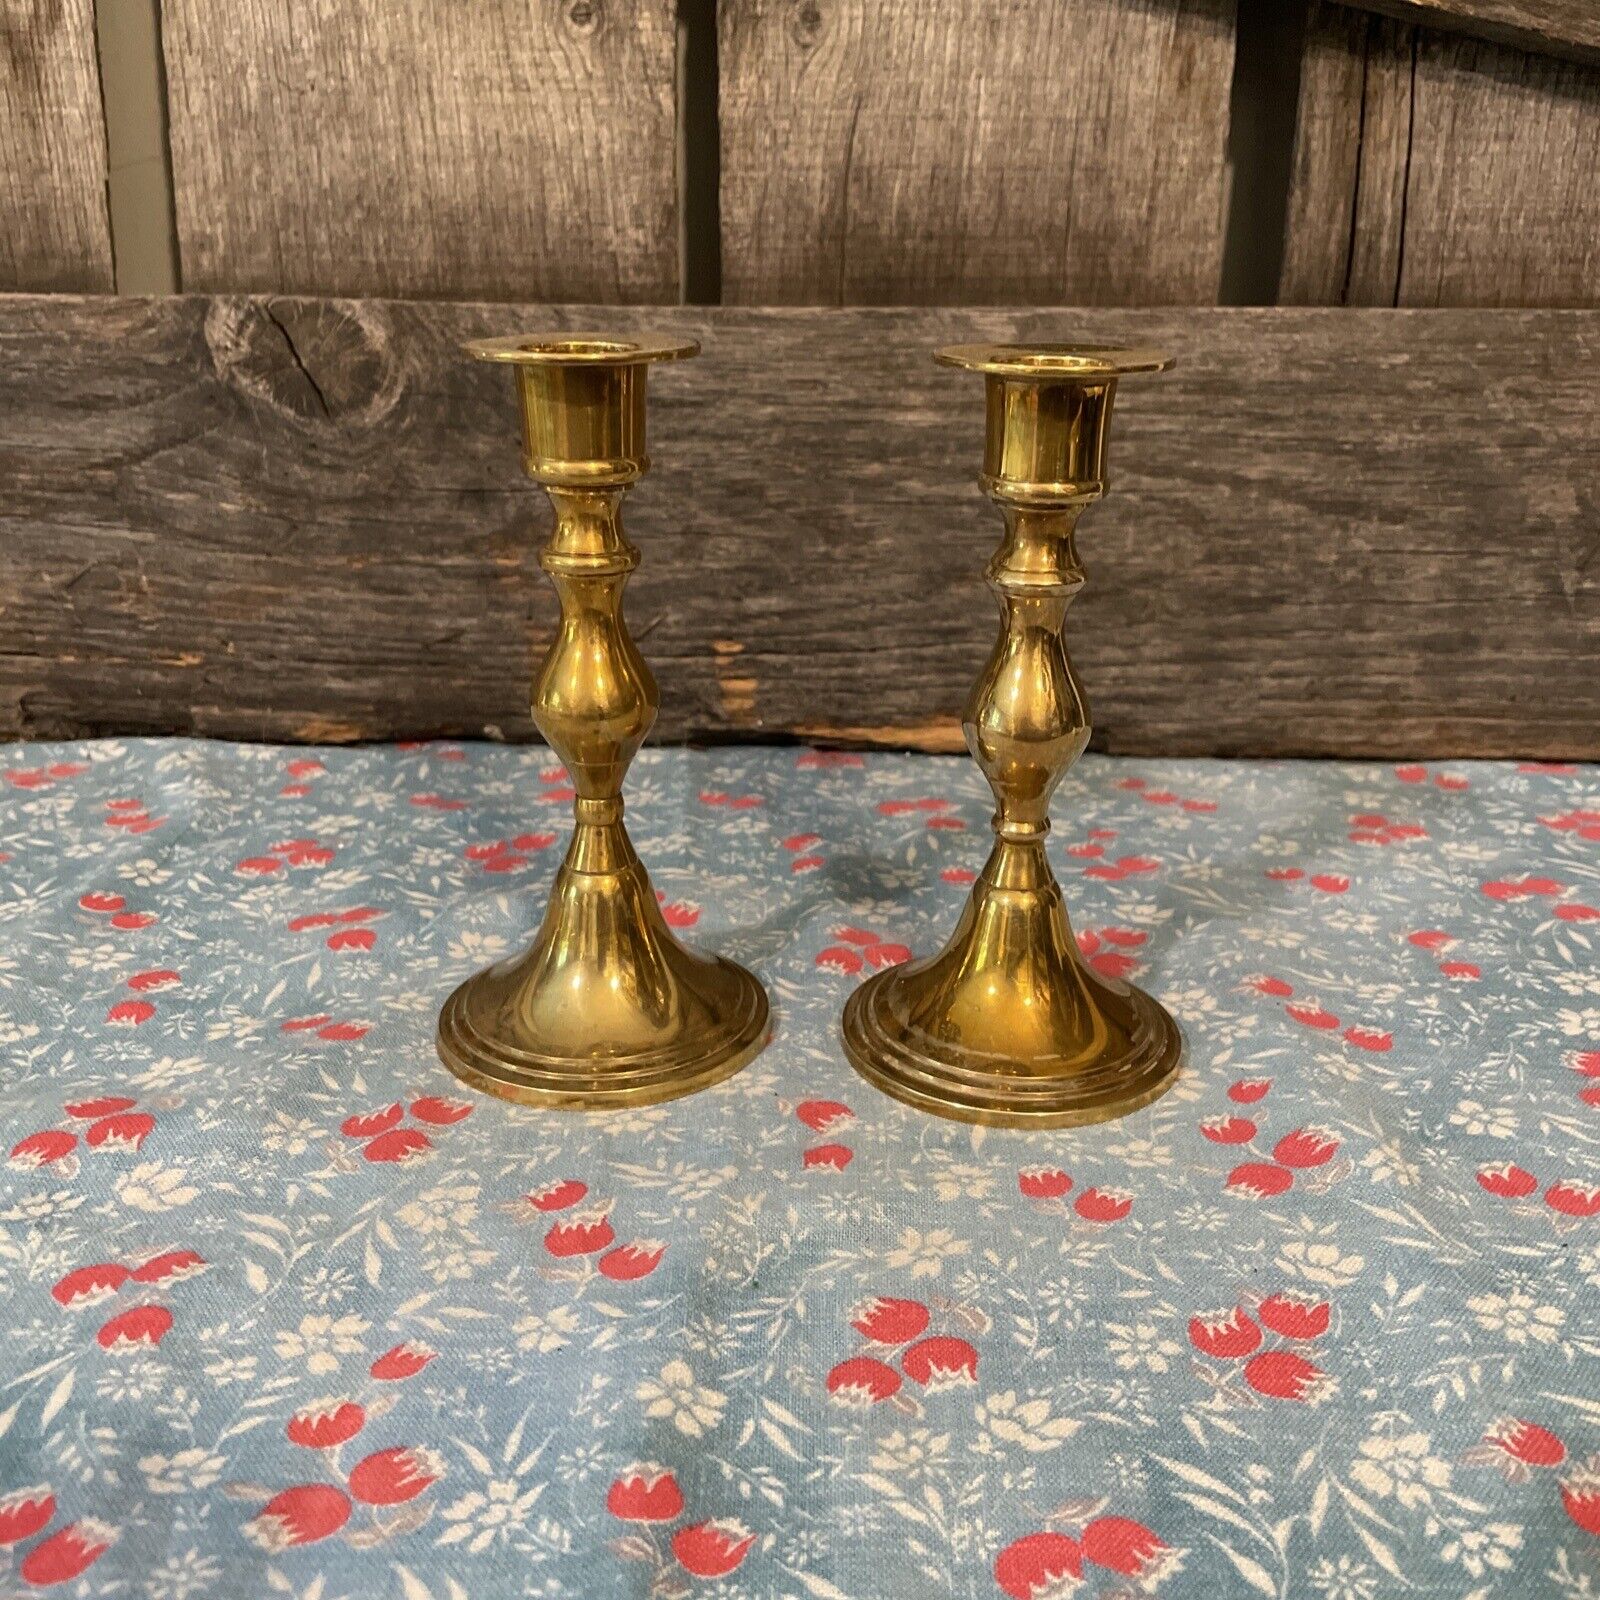 Vintage Pair Of Brass Candle Holders Candlesticks  Made In India 5.5 Inch